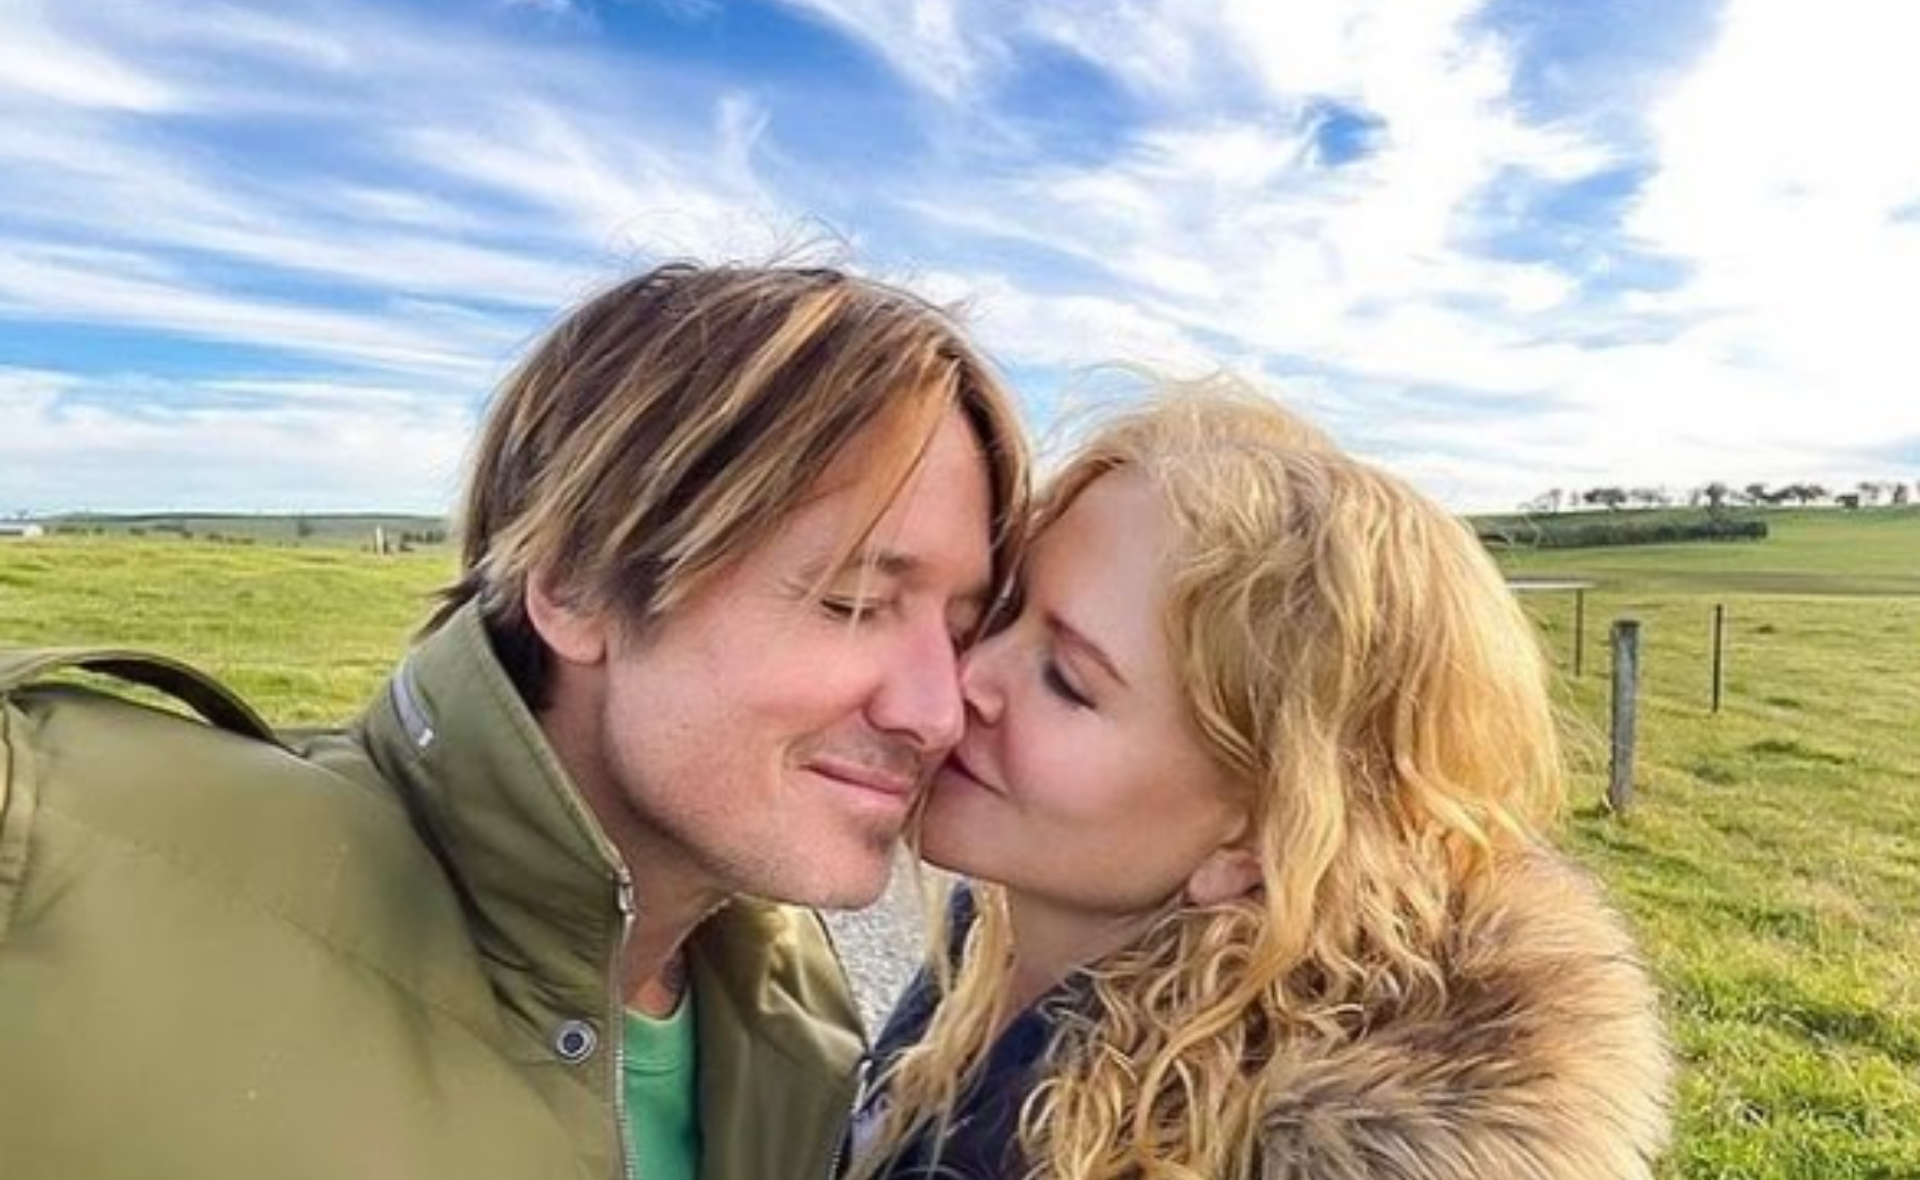 EXCLUSIVE: Why Keith Urban owes his “amazing life” to wife Nicole Kidman as he marks 15 years sober